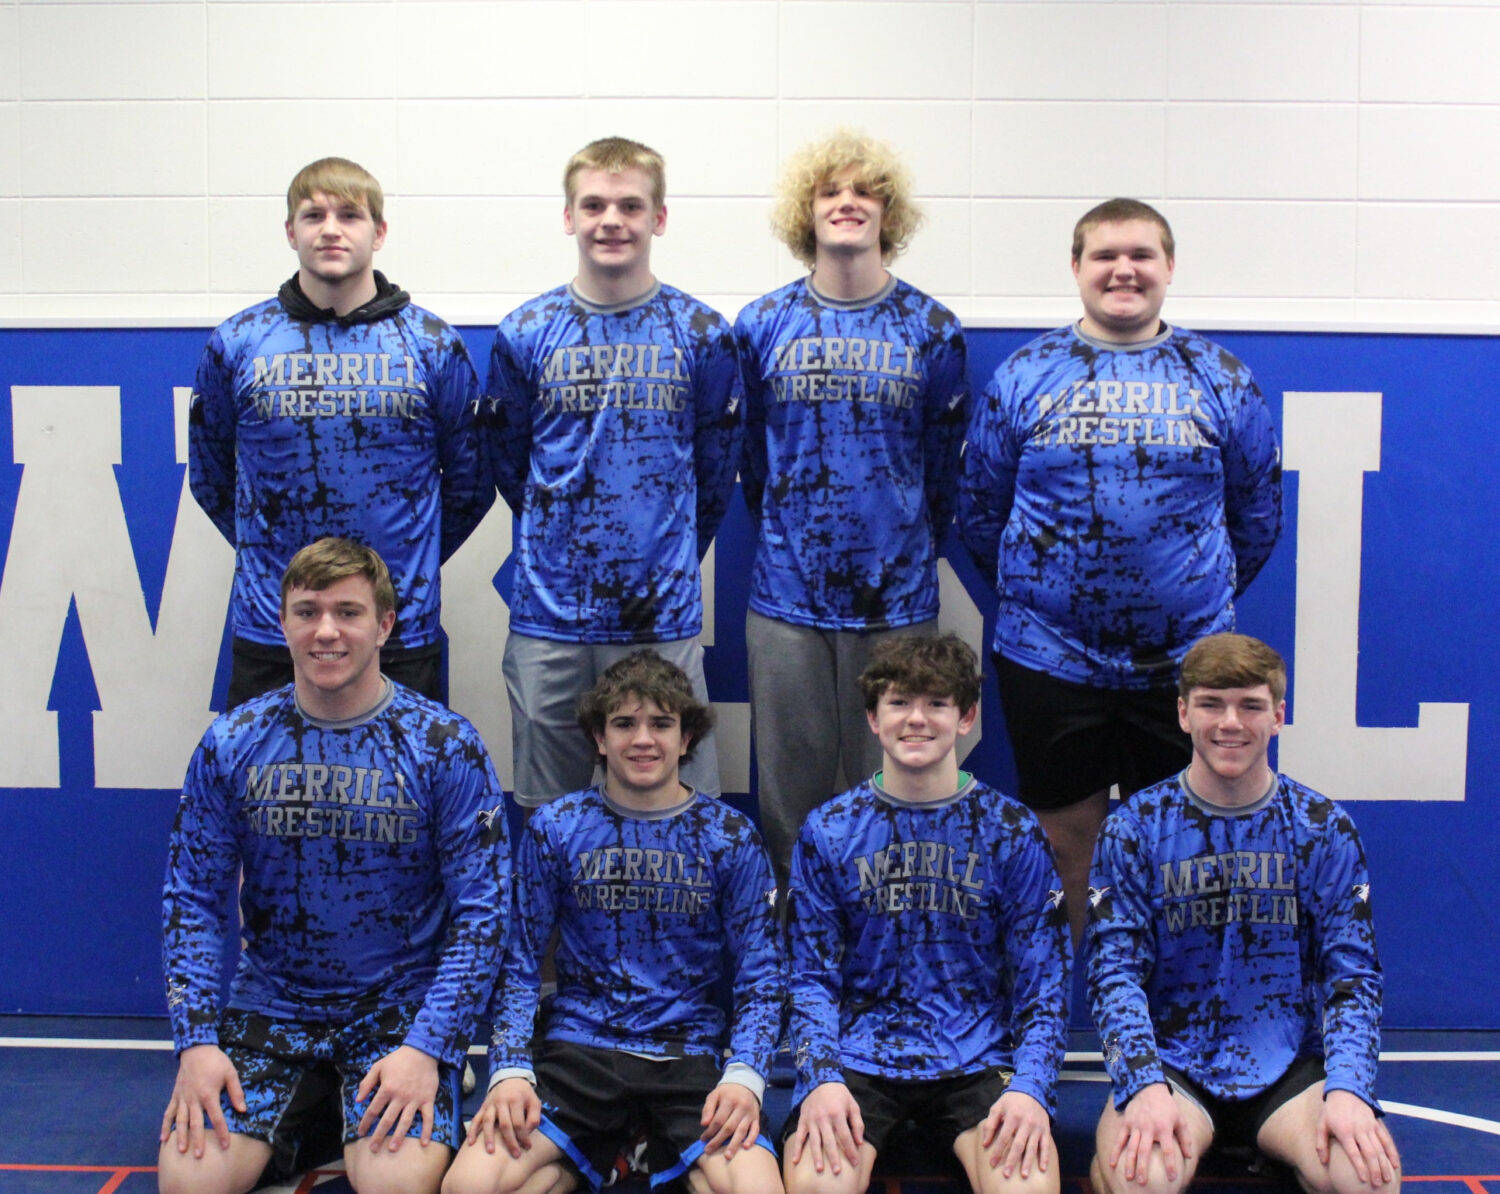 Merrill Varsity Wrestler are vying for a chance to go to State